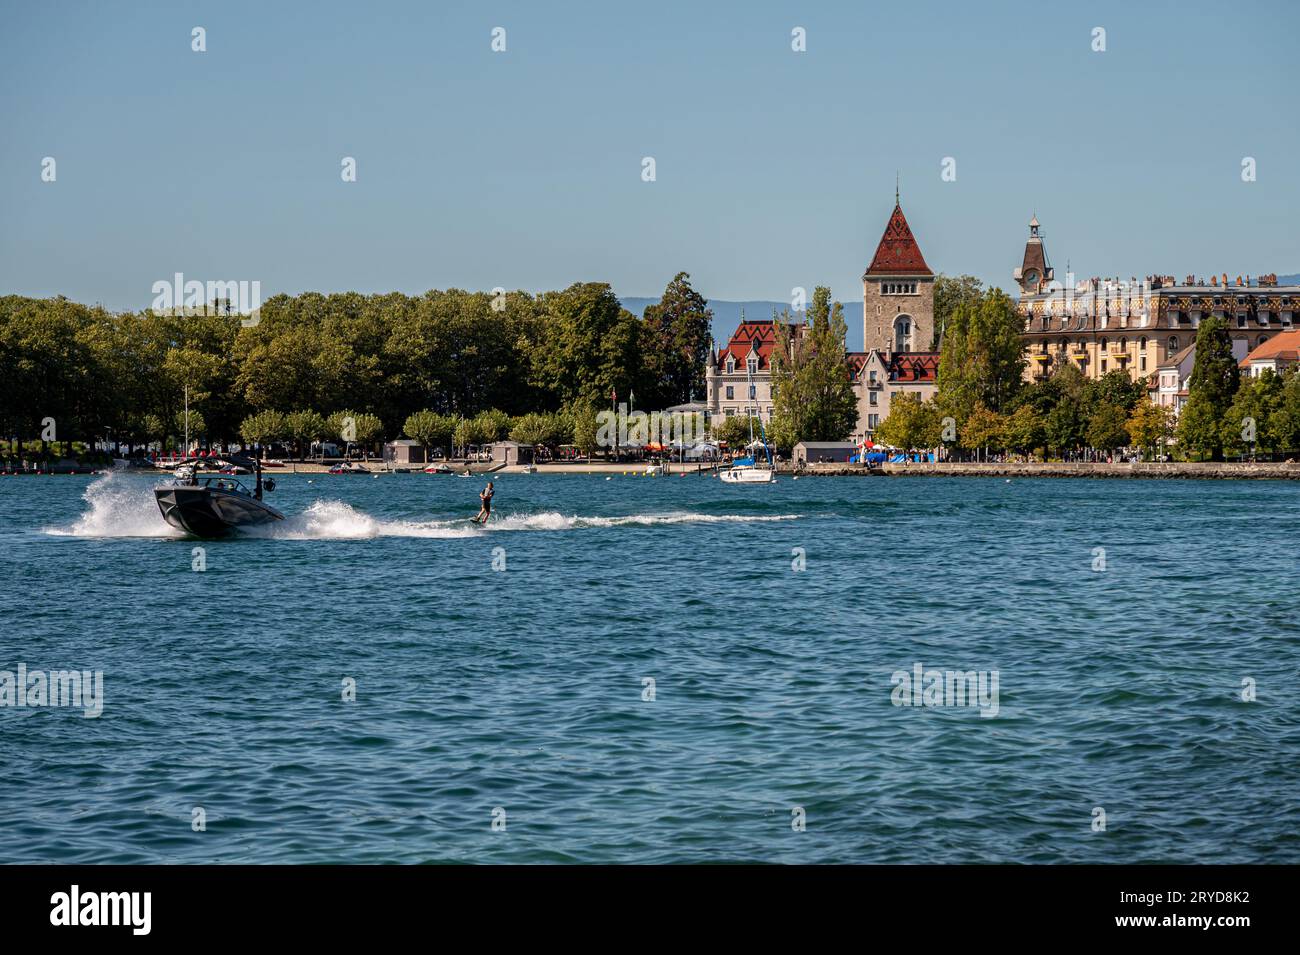 Ouchy, Lausanne, Vaud Canton, Switzerland - September 24, 2023 : Motorboat with people wakeboarding. Lake Geneva and Castle of Ouchy. Stock Photo